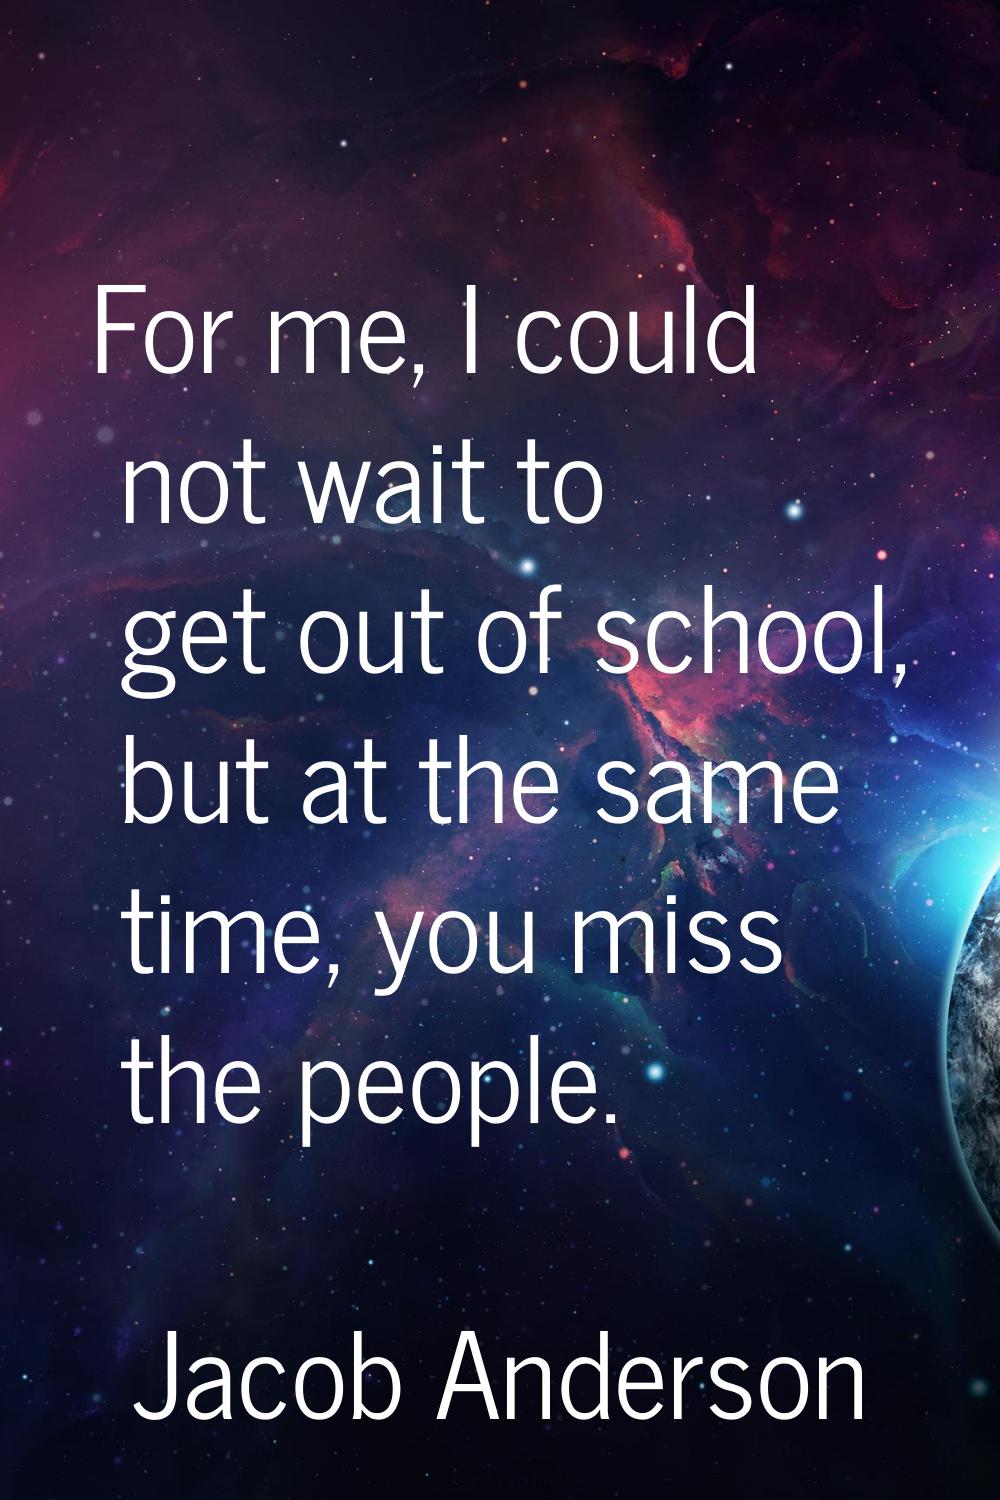 For me, I could not wait to get out of school, but at the same time, you miss the people.